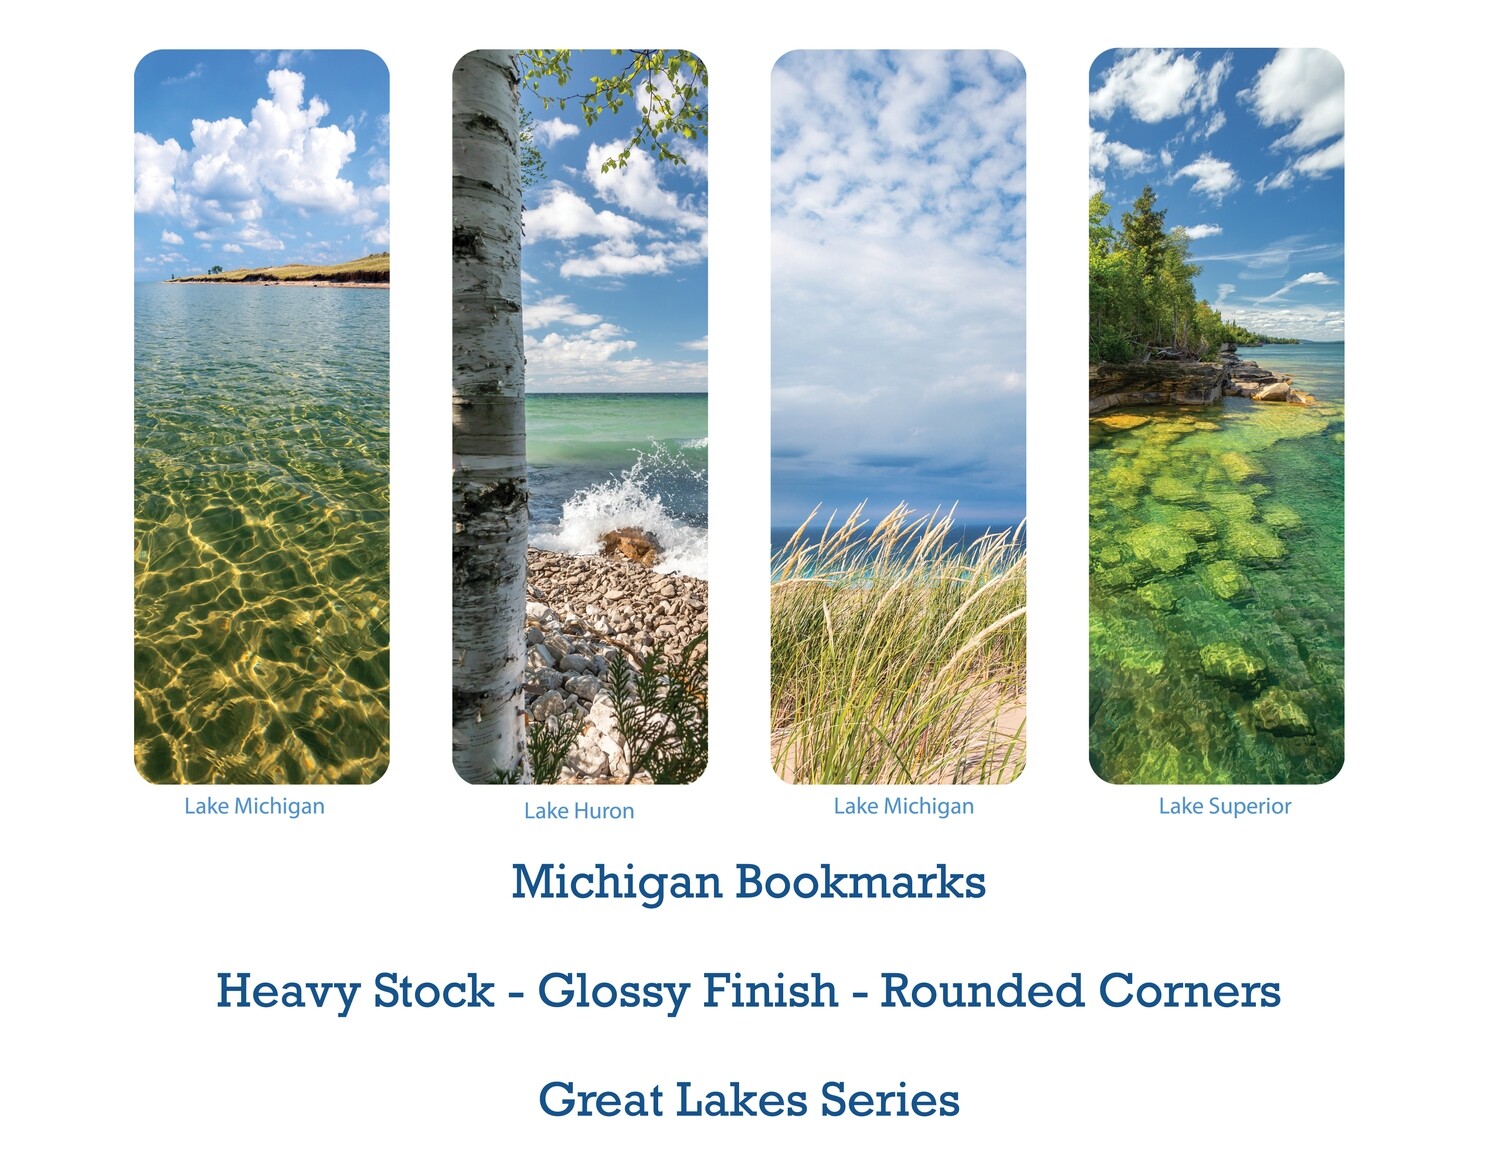 Michigan Themed Bookmarks - 4-Pack - Great Lakes Series I - FREE SHIPPING!